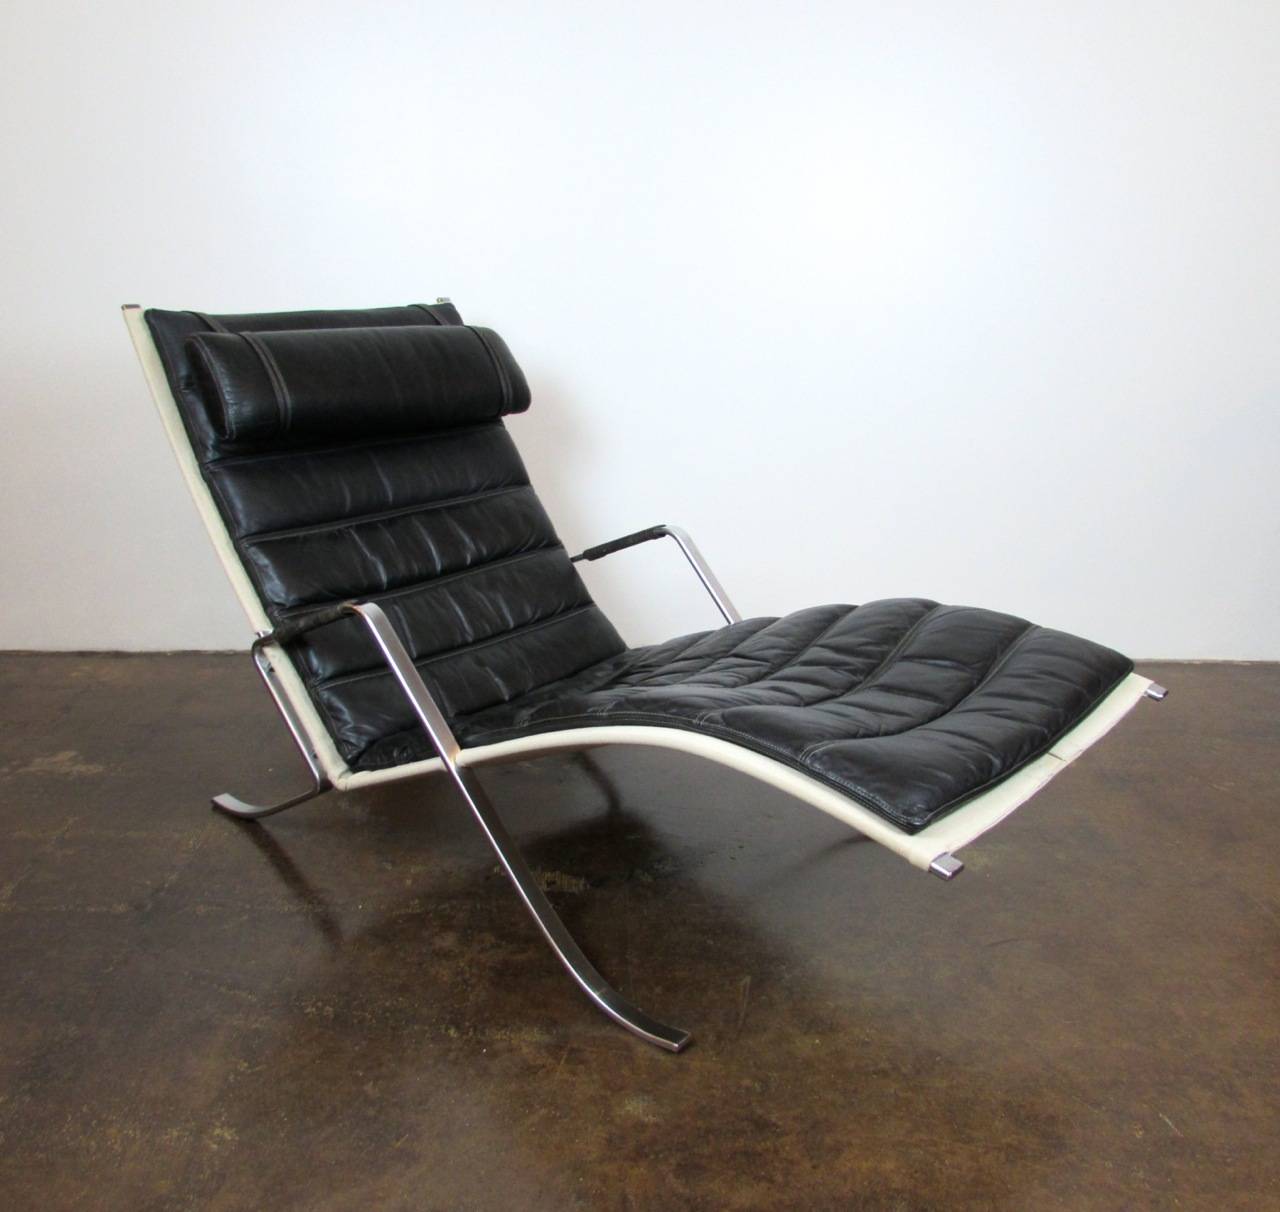 Grasshopper chair designed in 1968 by Preben Fabricius and Jørgen Kastholm by Lange Production in excellent, original condition.

Chaise lounge in canvas with loose quilted leather cushions and loose neck pillow with a chrome-plated steel frame